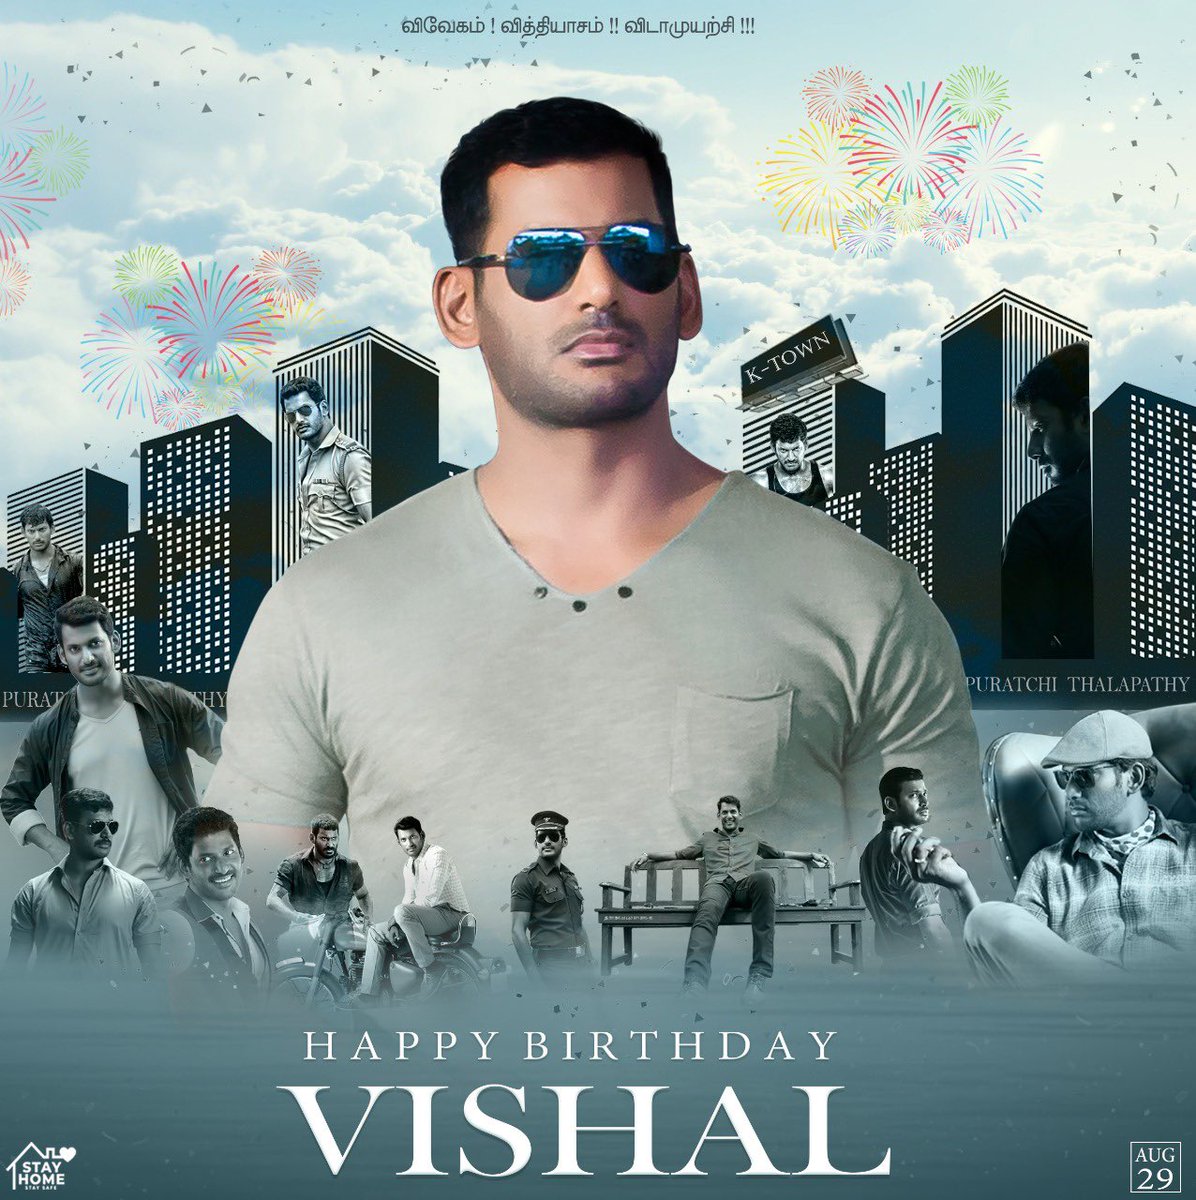 Here's The Common DP To Celebrate Action Hero, Puratchi Thalapathy @VishalKOfficial’s Birthday!

#HBDVishal
#HappyBirthdayVishal 
#VishalBdayCDP 

#Vishal @VffVishal